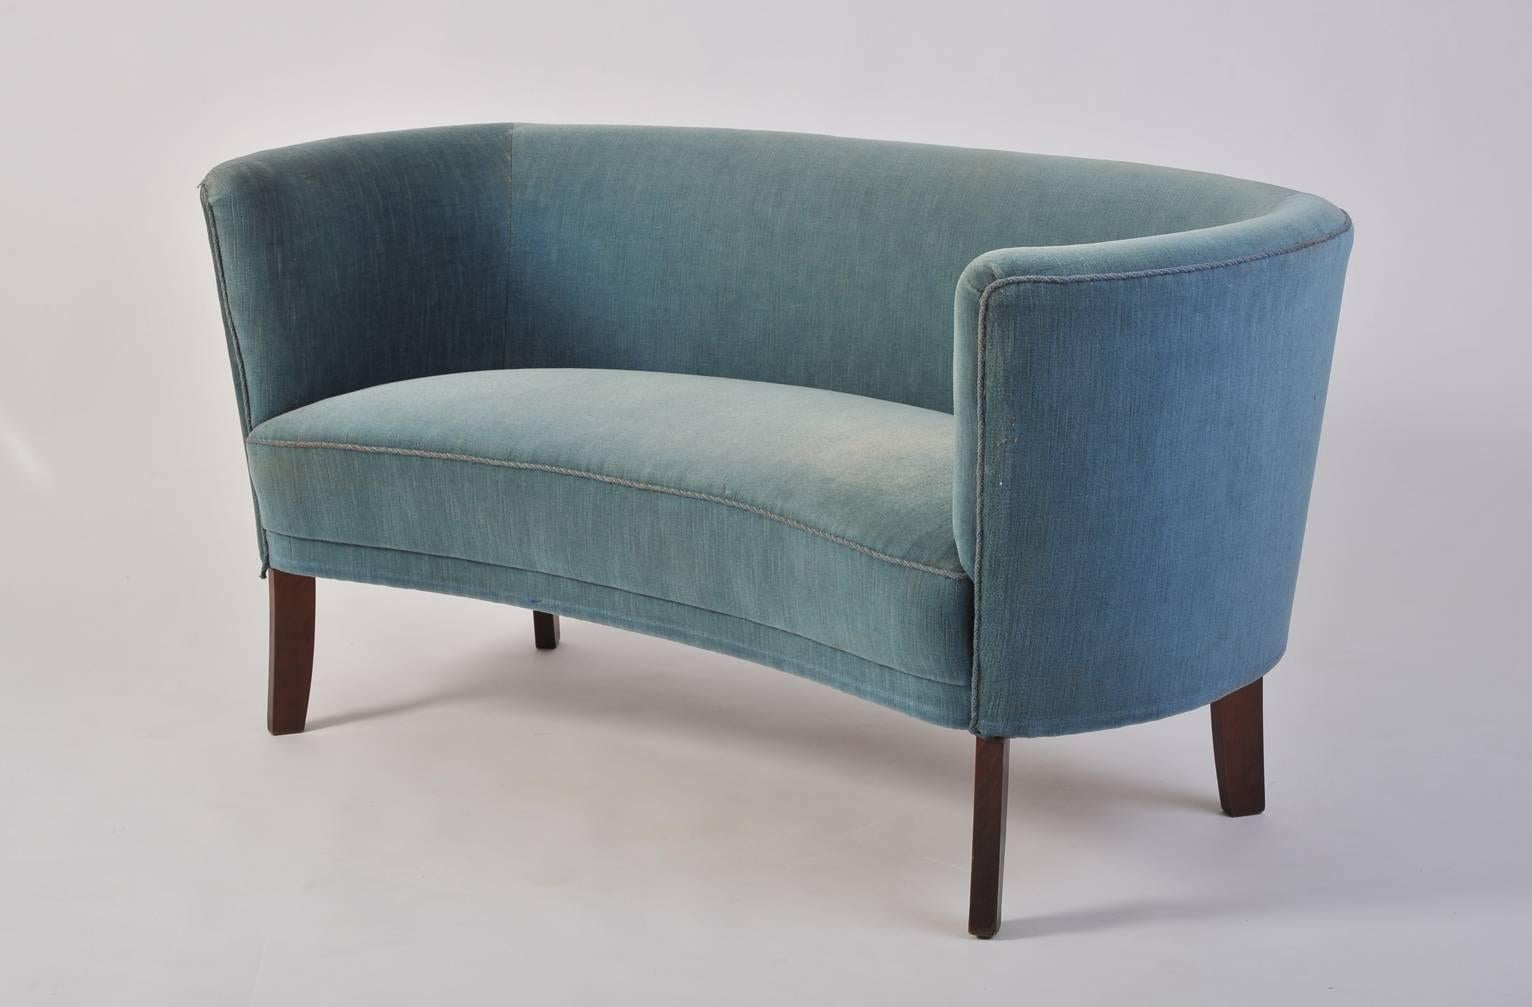 A curved 'loveseat' sofa, in its original blue velvet upholstery
Sweden, circa 1940.